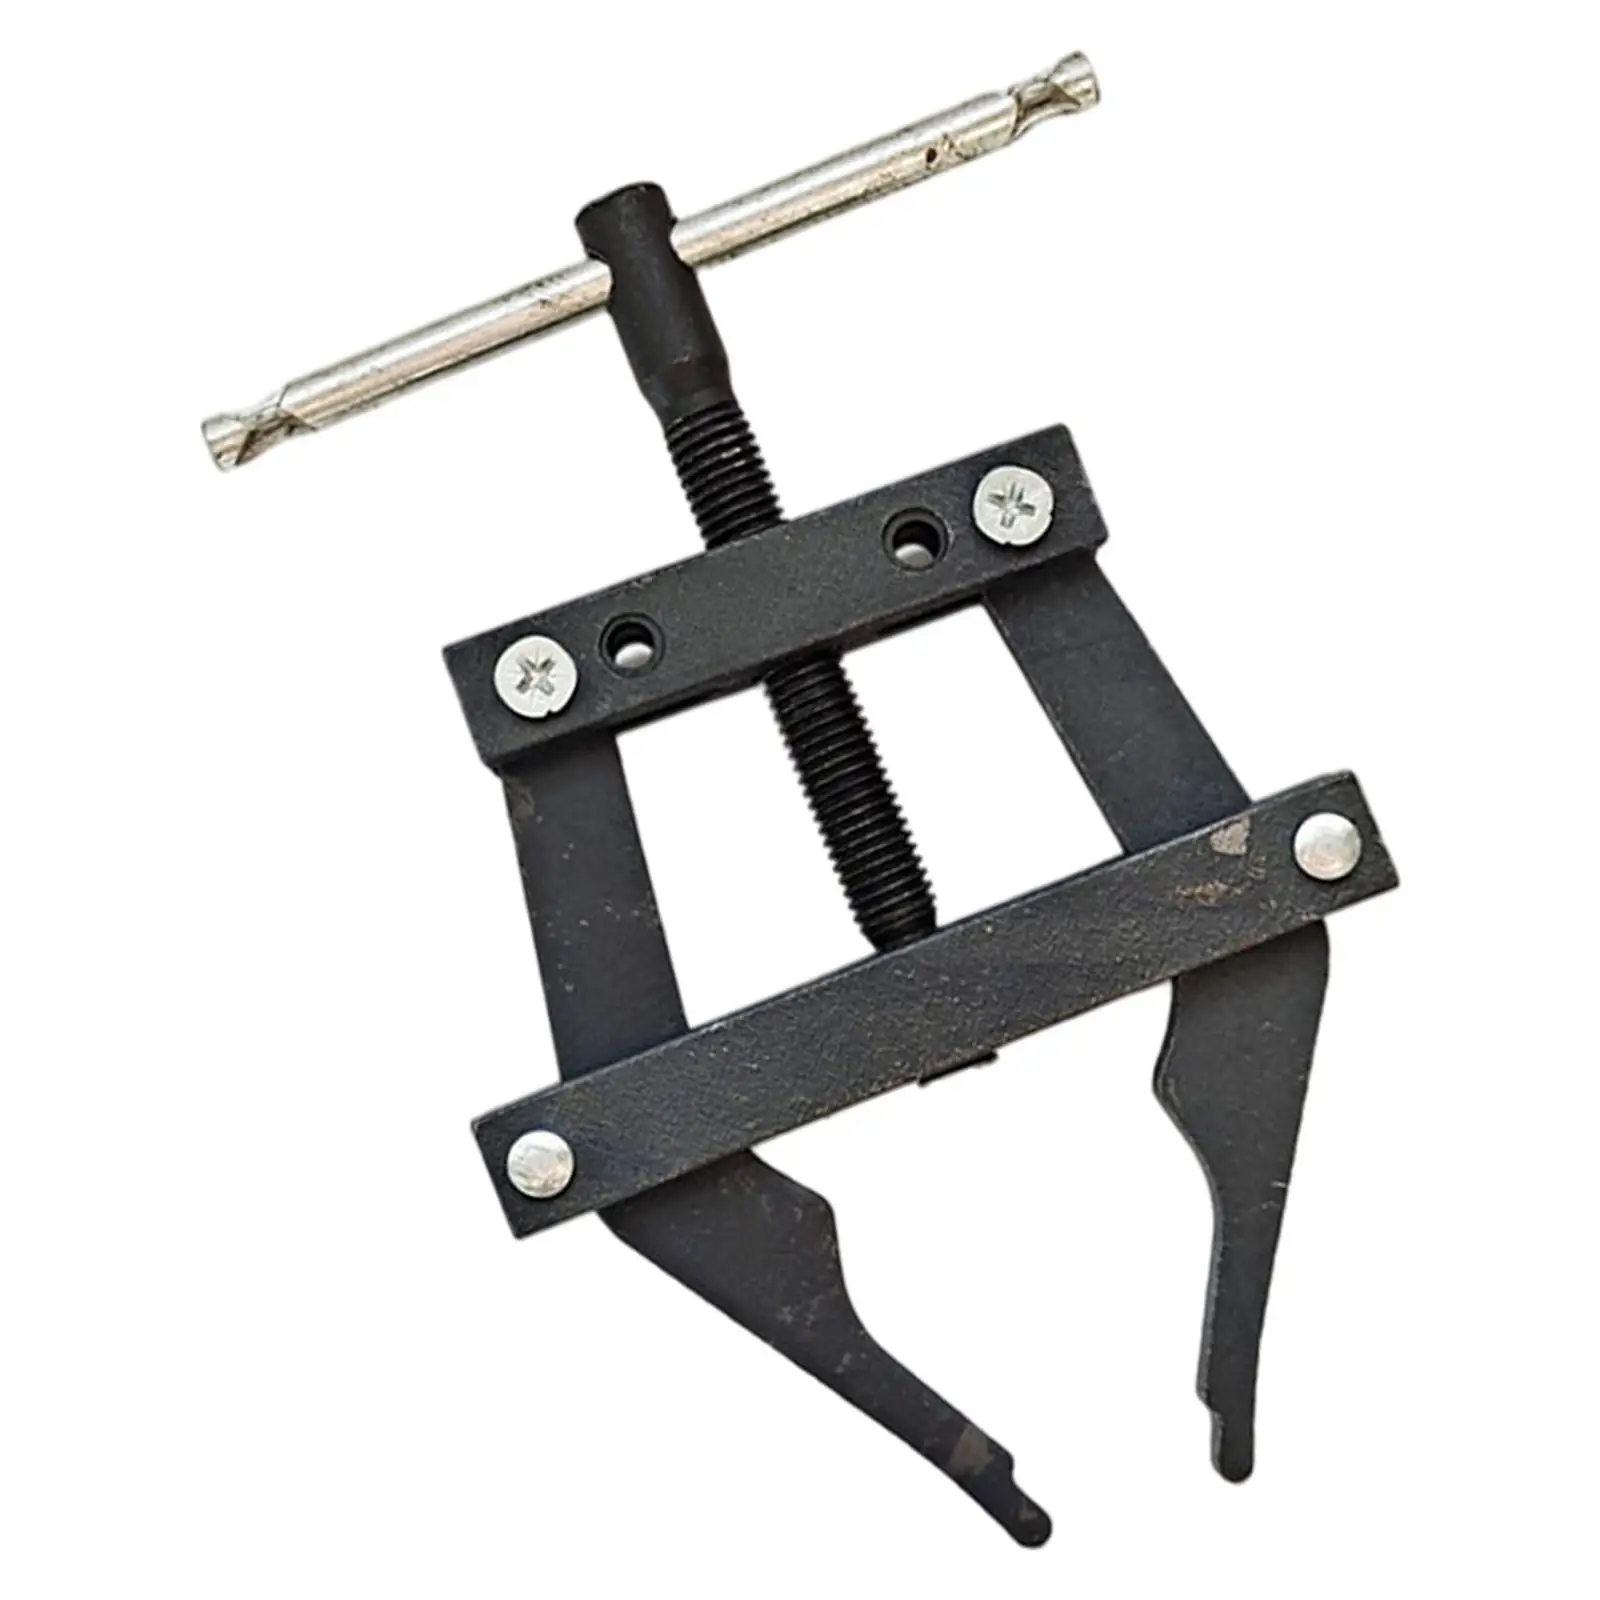 Chain Connecting Tool Cutter Roller Chain Adjuster Puller Holder for 